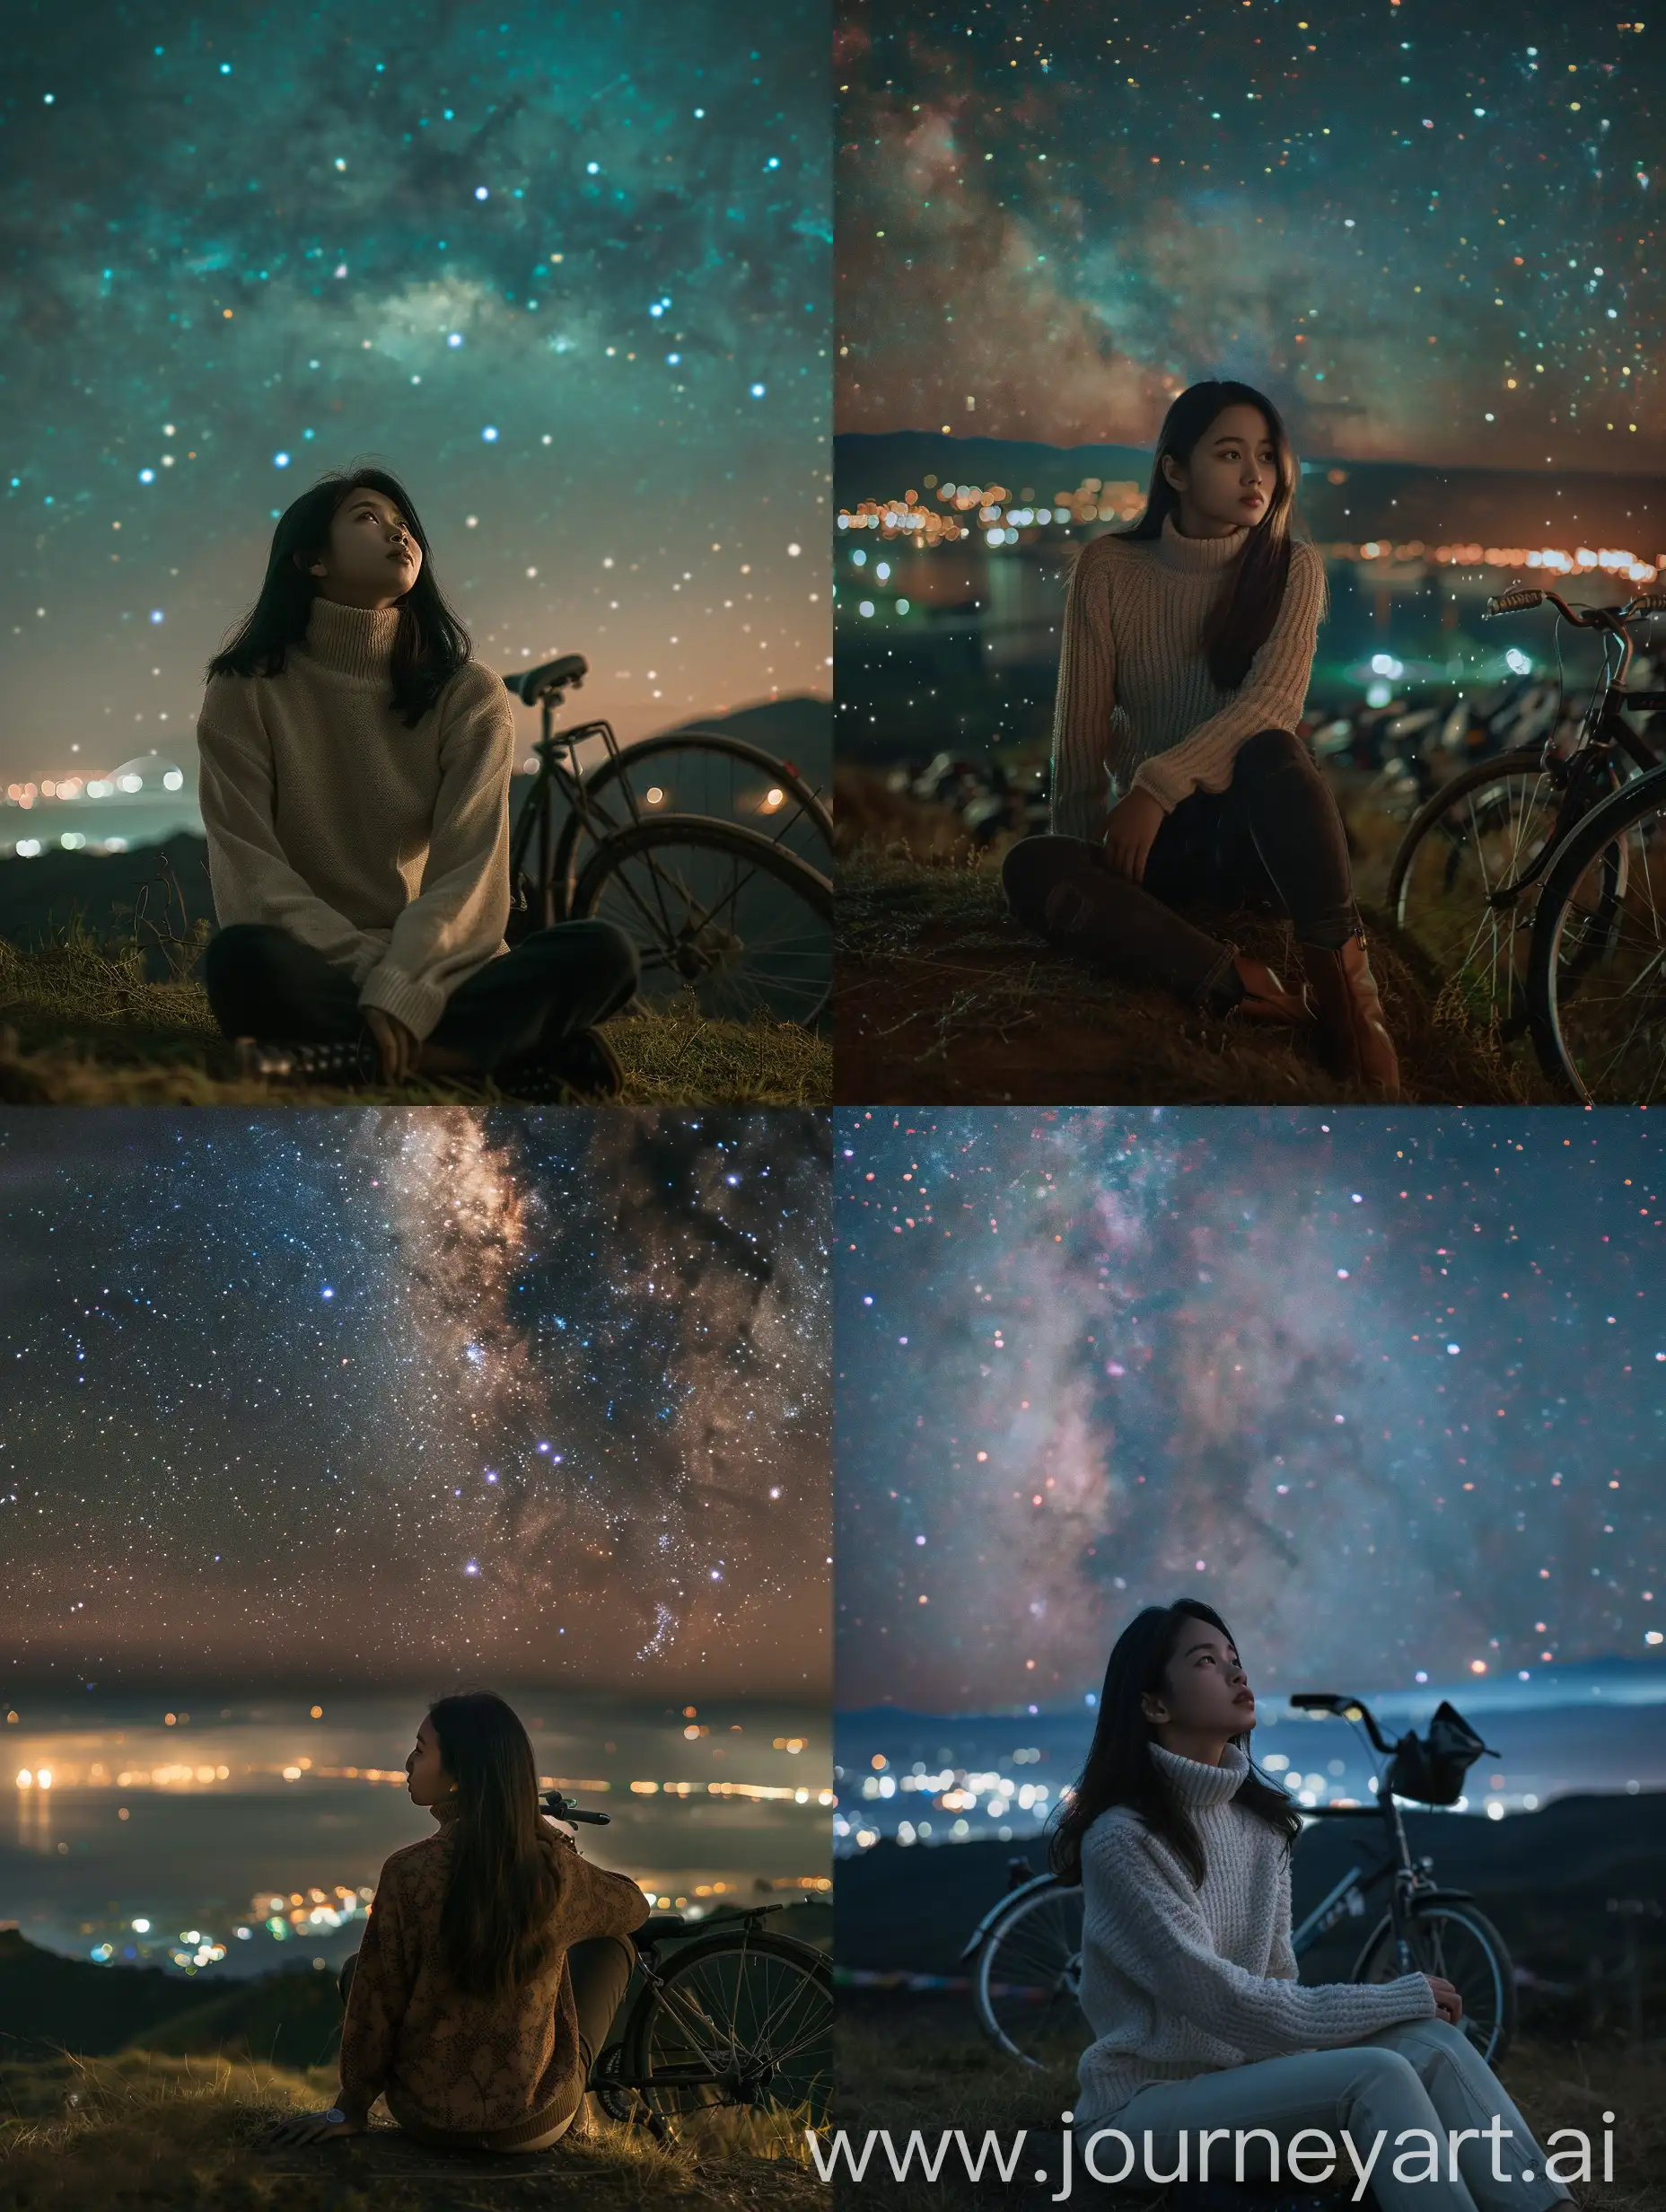 Indonesian-Woman-Sitting-Under-Starry-Night-Sky-with-Bike